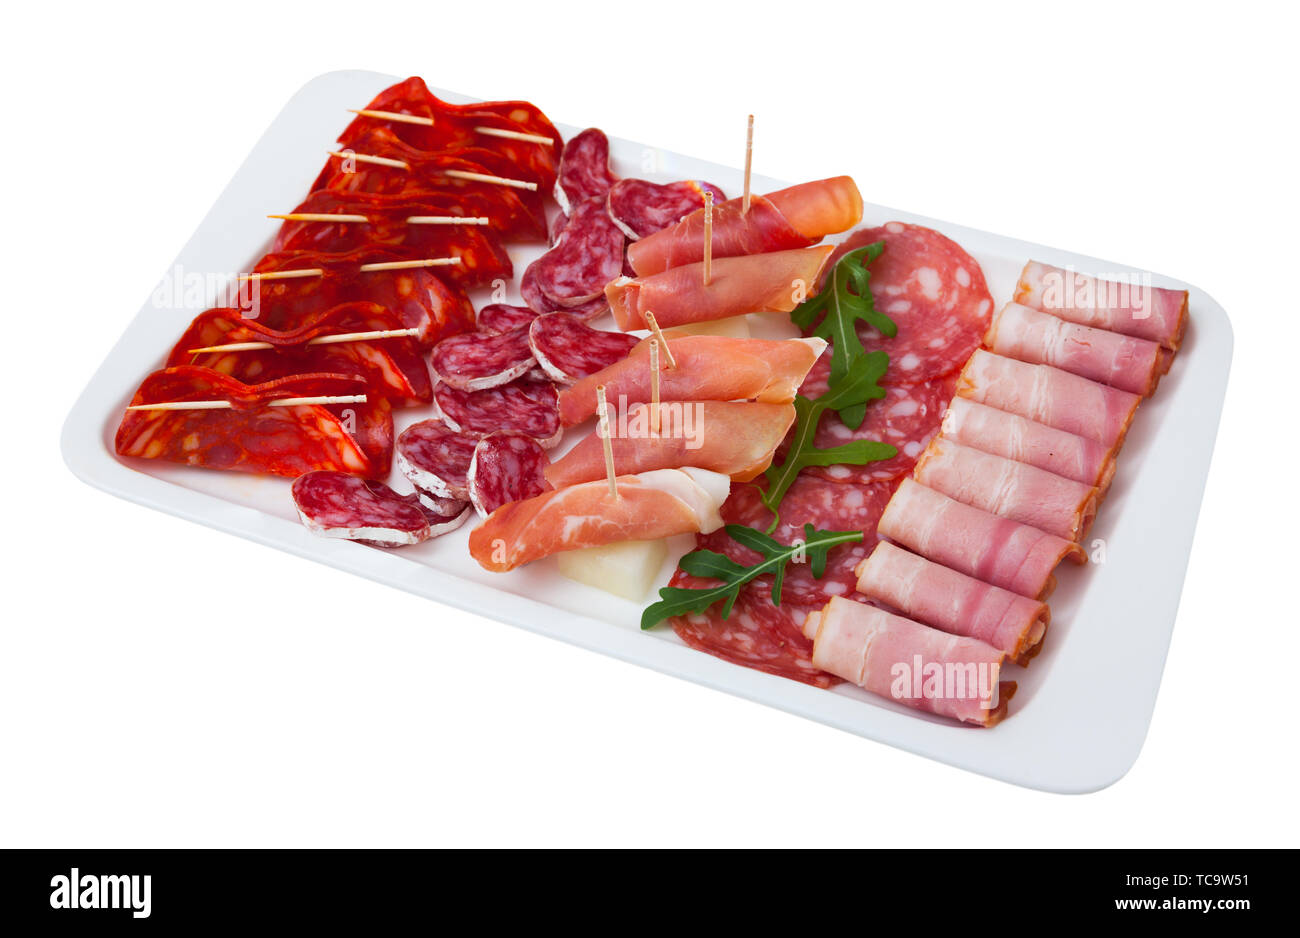 Appetizing cold cuts from Spanish ham, spicy dry-cured sausages and bacon with olives and arugula on white plate. Isolated over white background Stock Photo